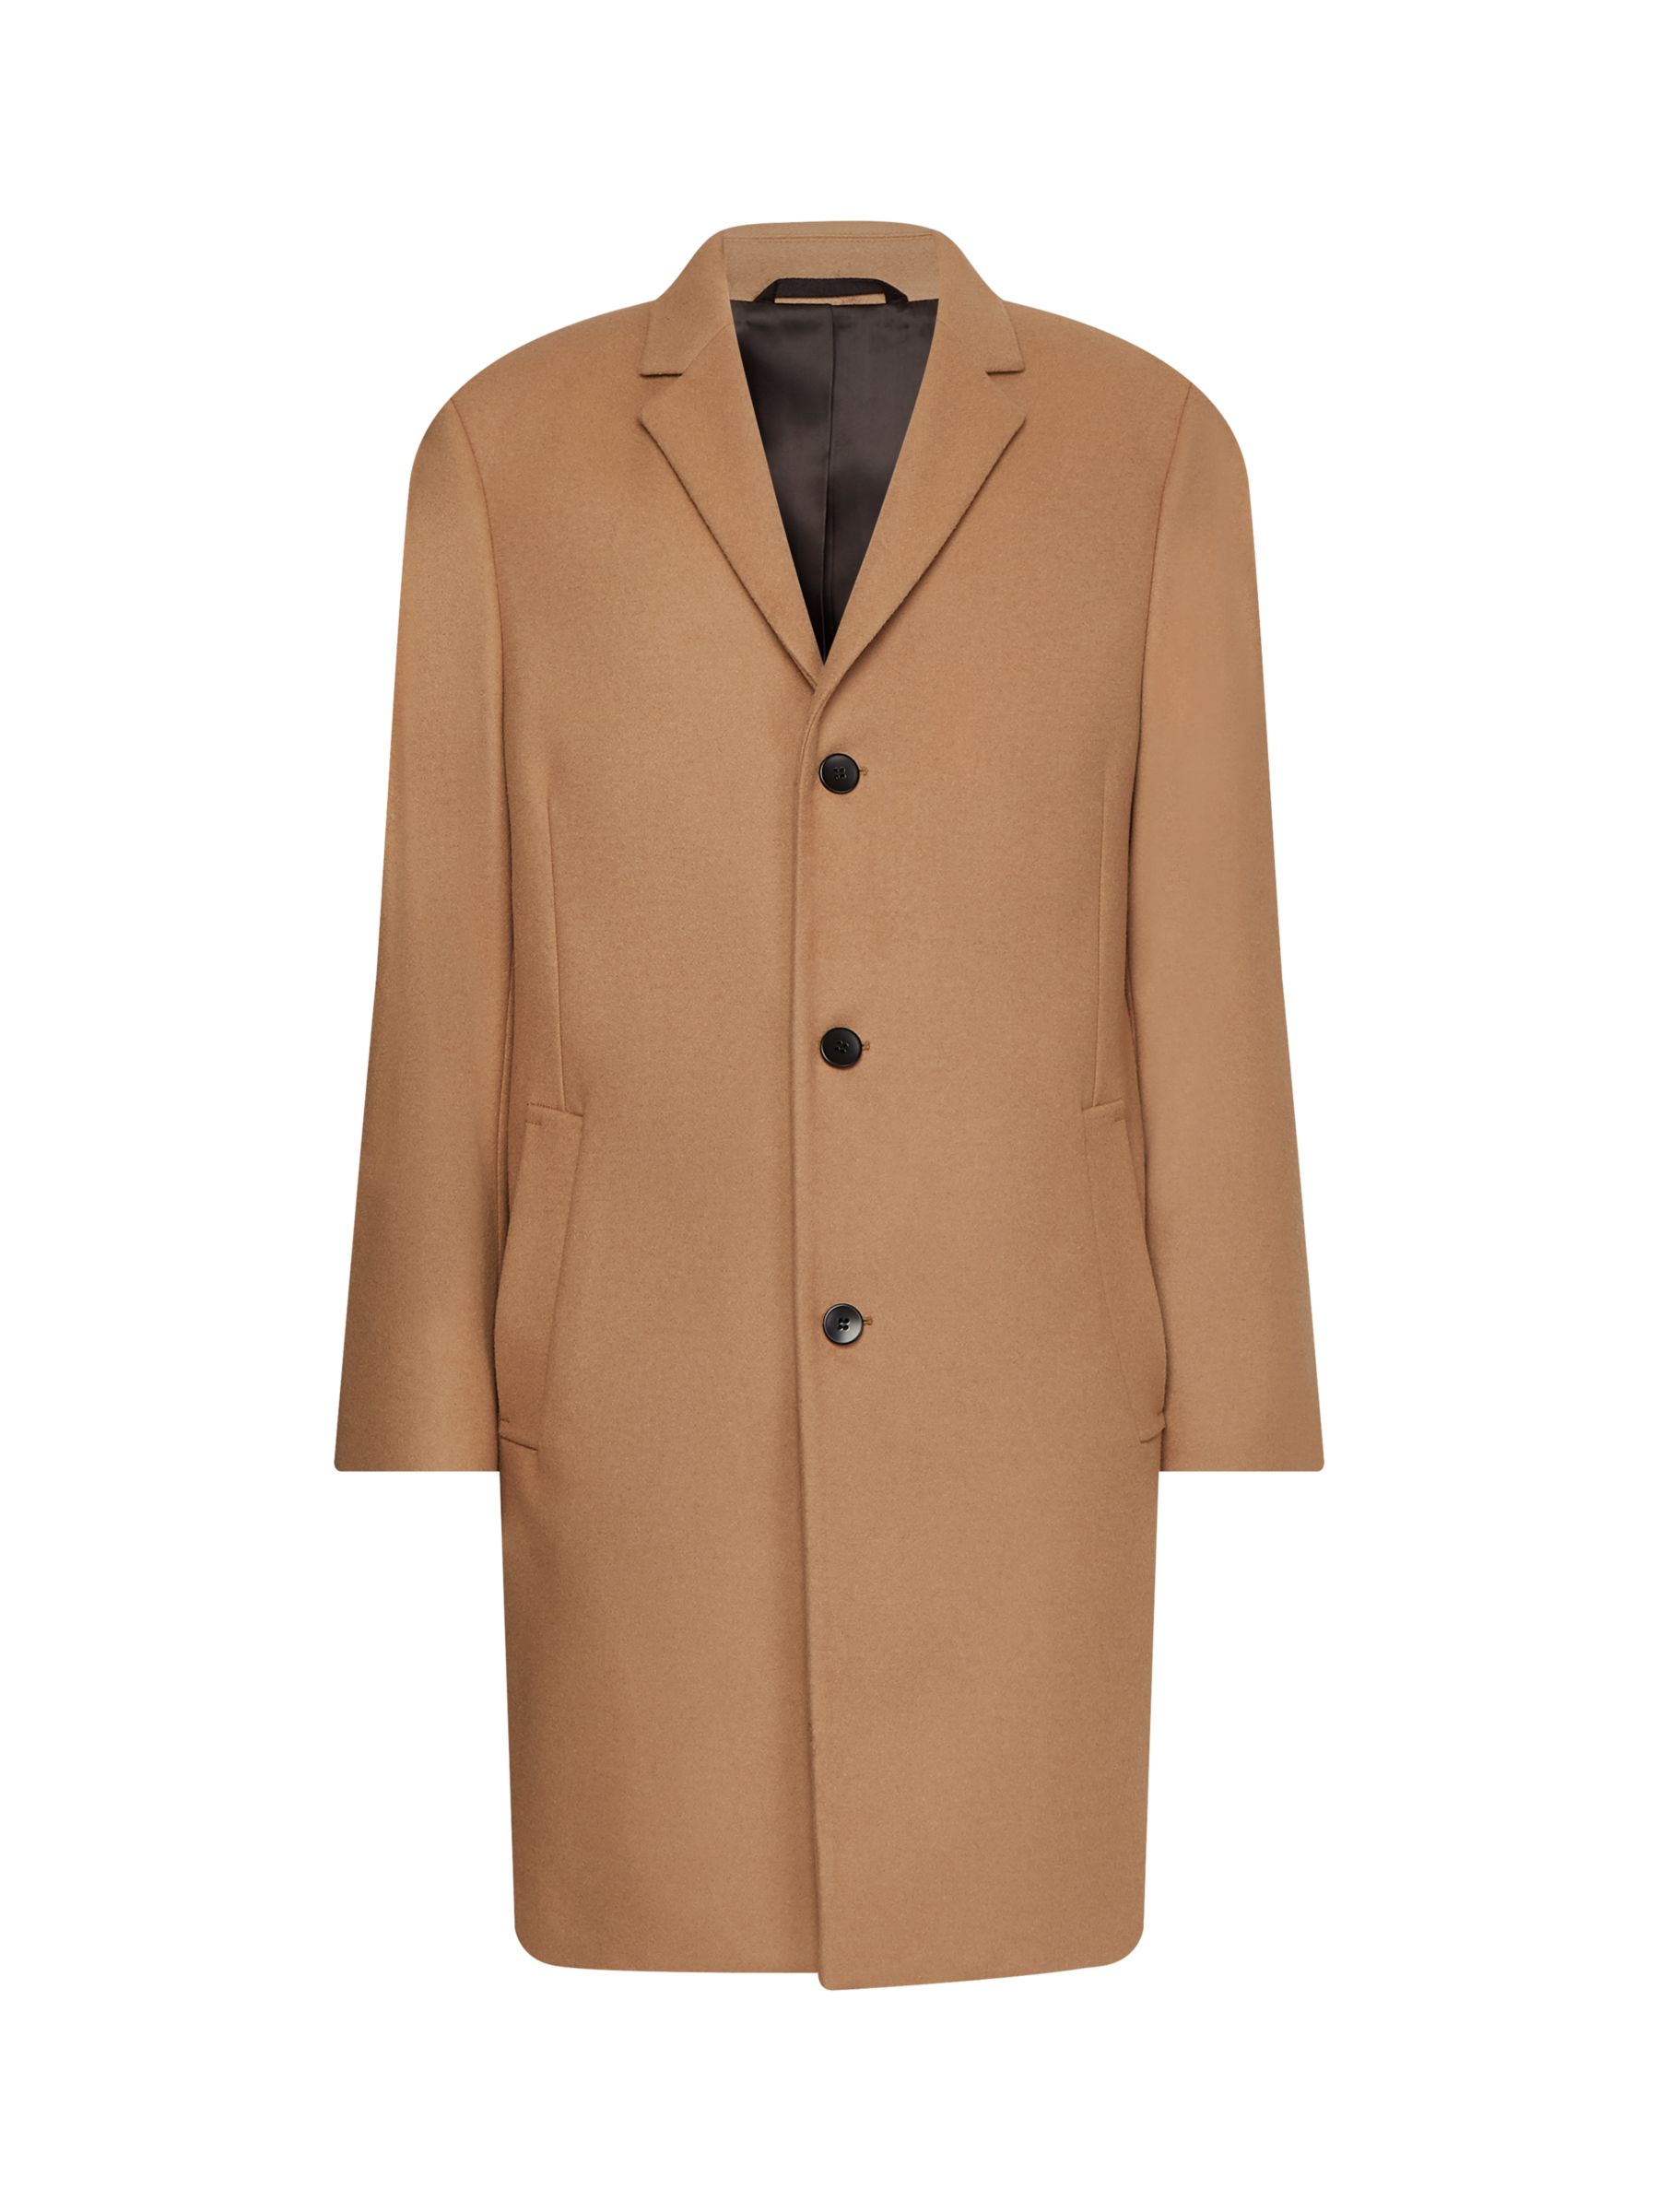 Calvin Klein Wool and Cashmere Tailored Coat, Camel at John Lewis & Partners